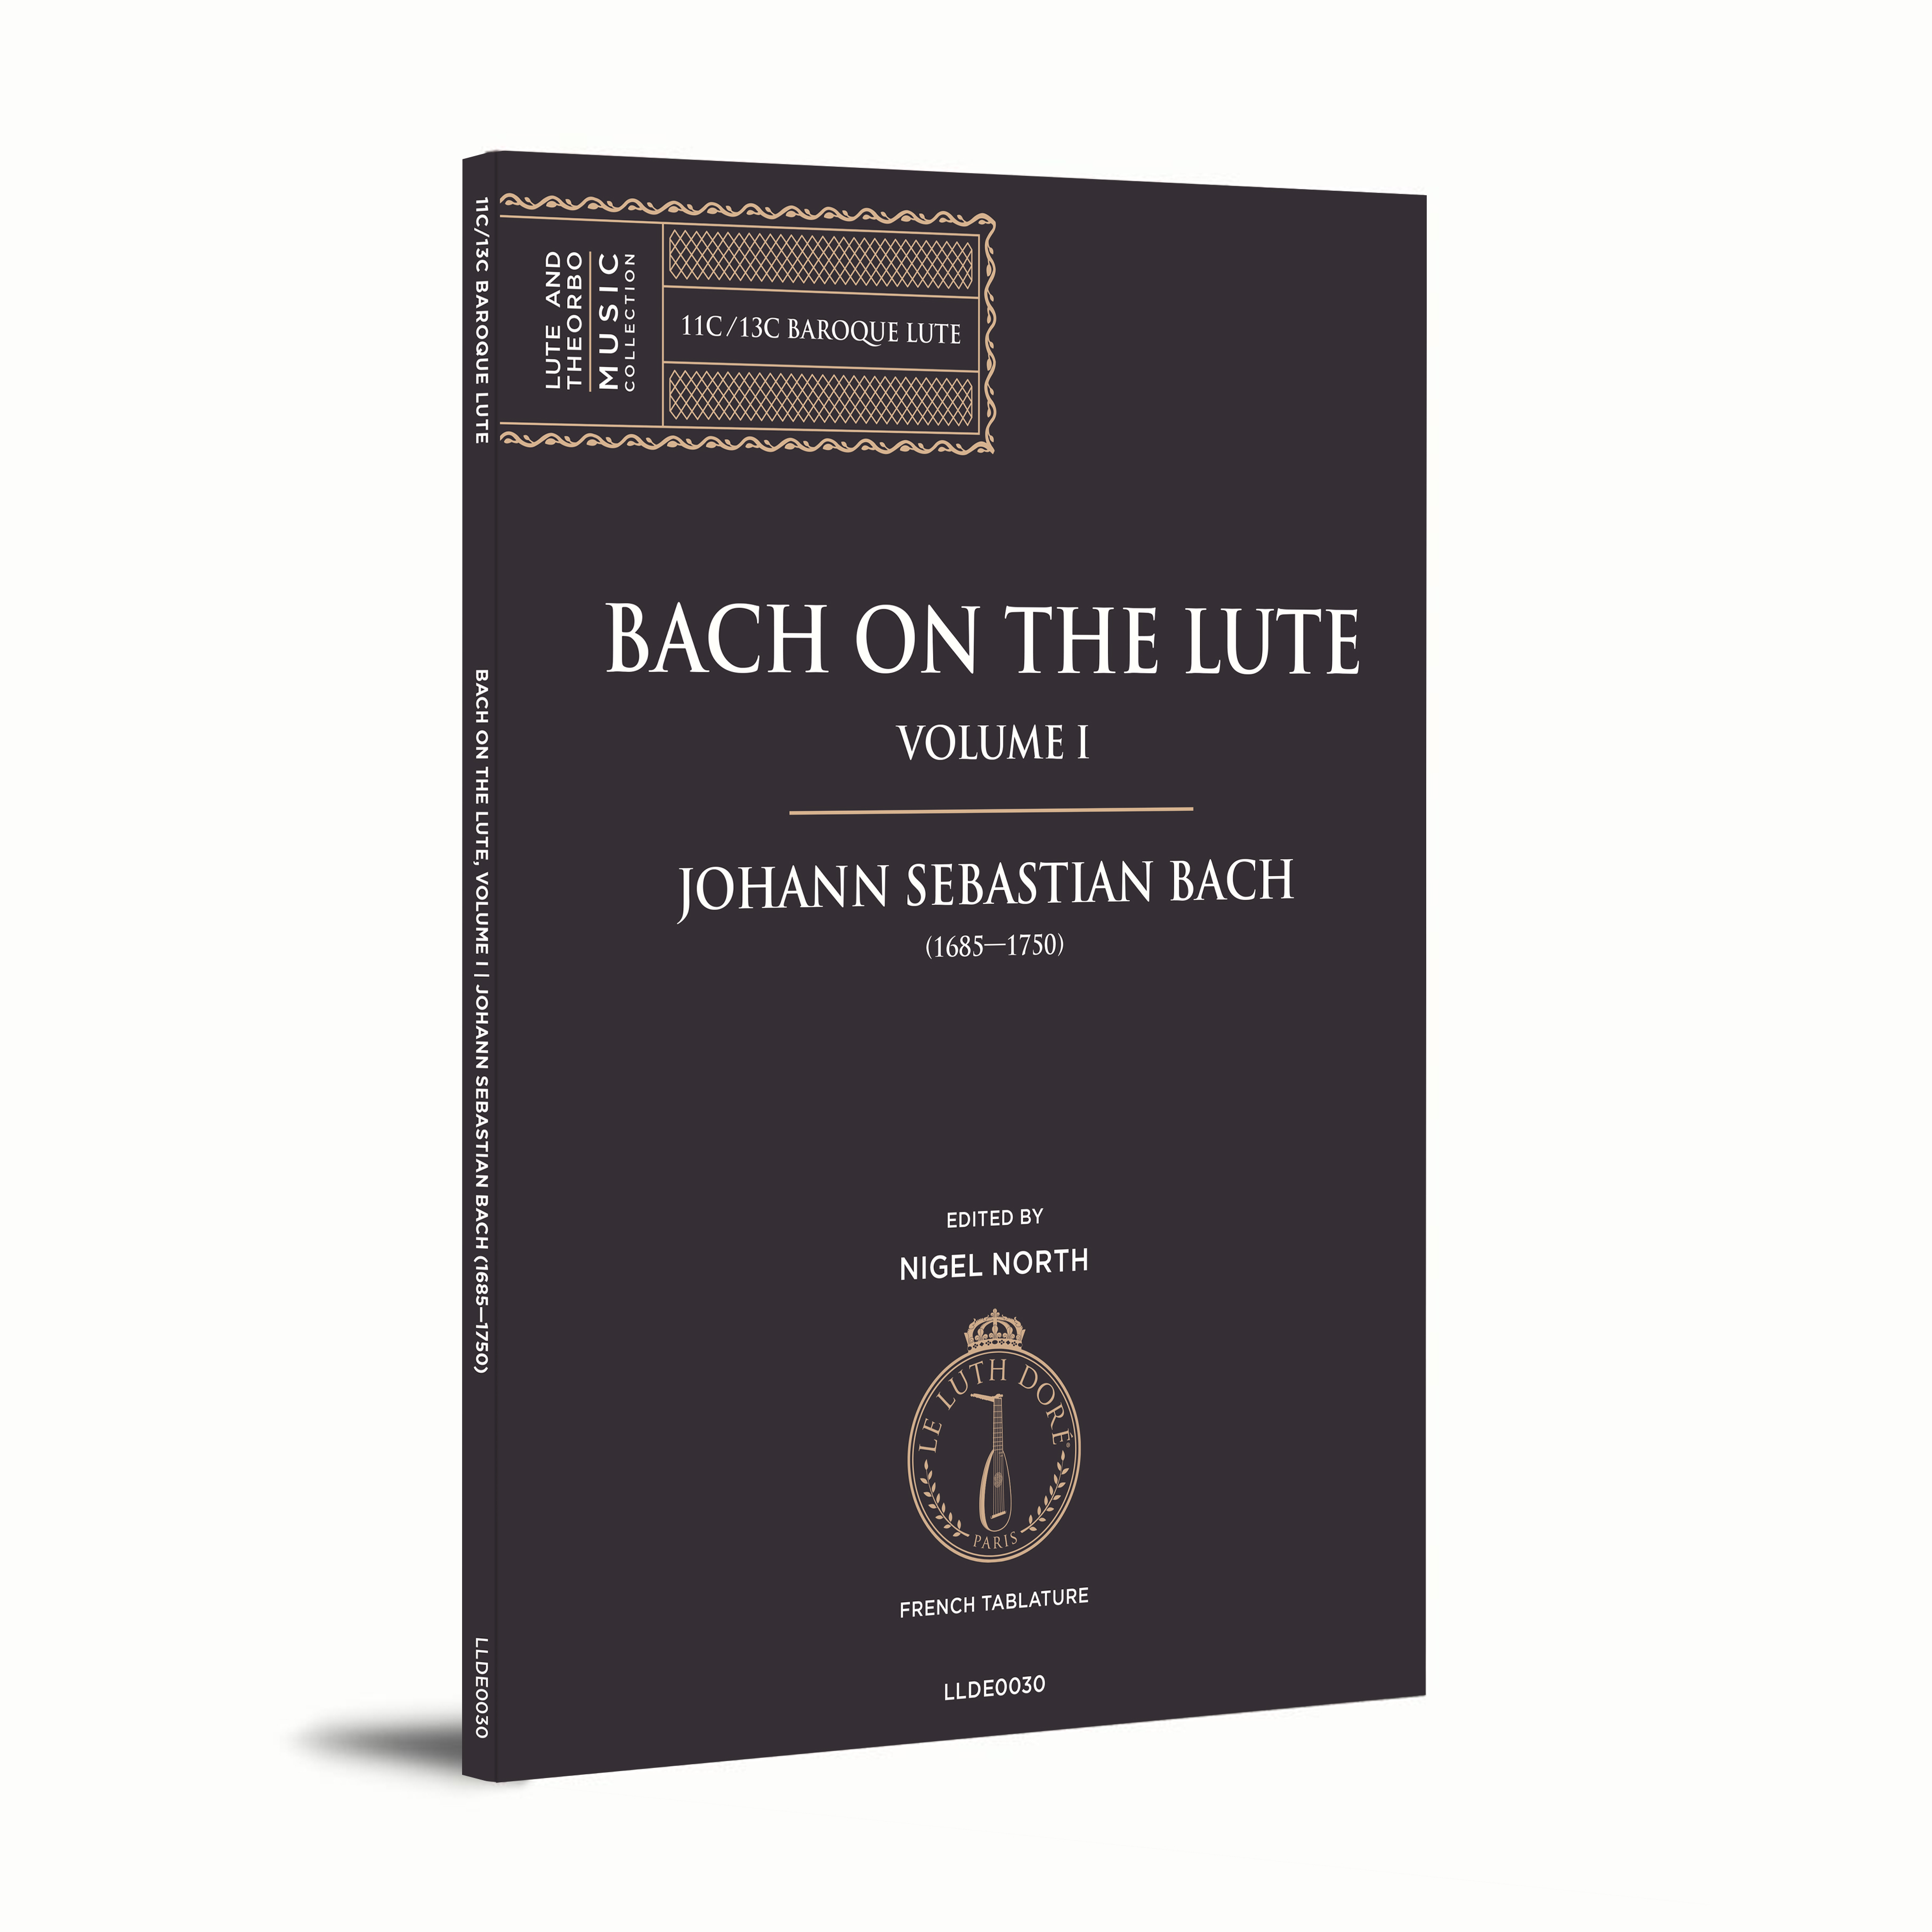 Unveiling Bach's Lute Legacy: Two Volumes by Nigel North